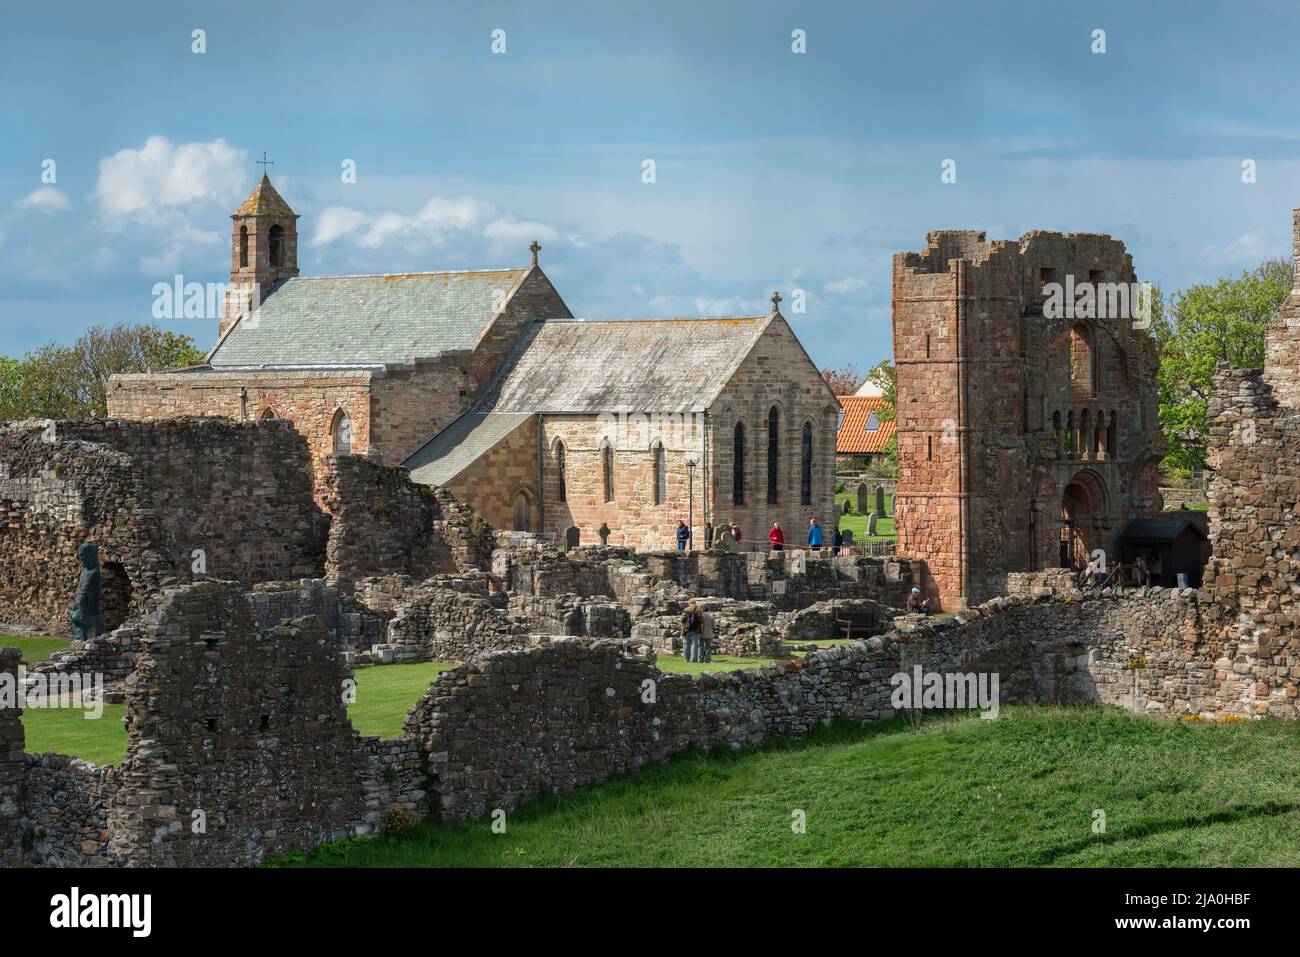 Lindisfarne Priory, view of a part of the ruins of Lindisfarne Priory with St Mary's Parish Church sited within its walls, Holy Island, Northumberland Stock Photo